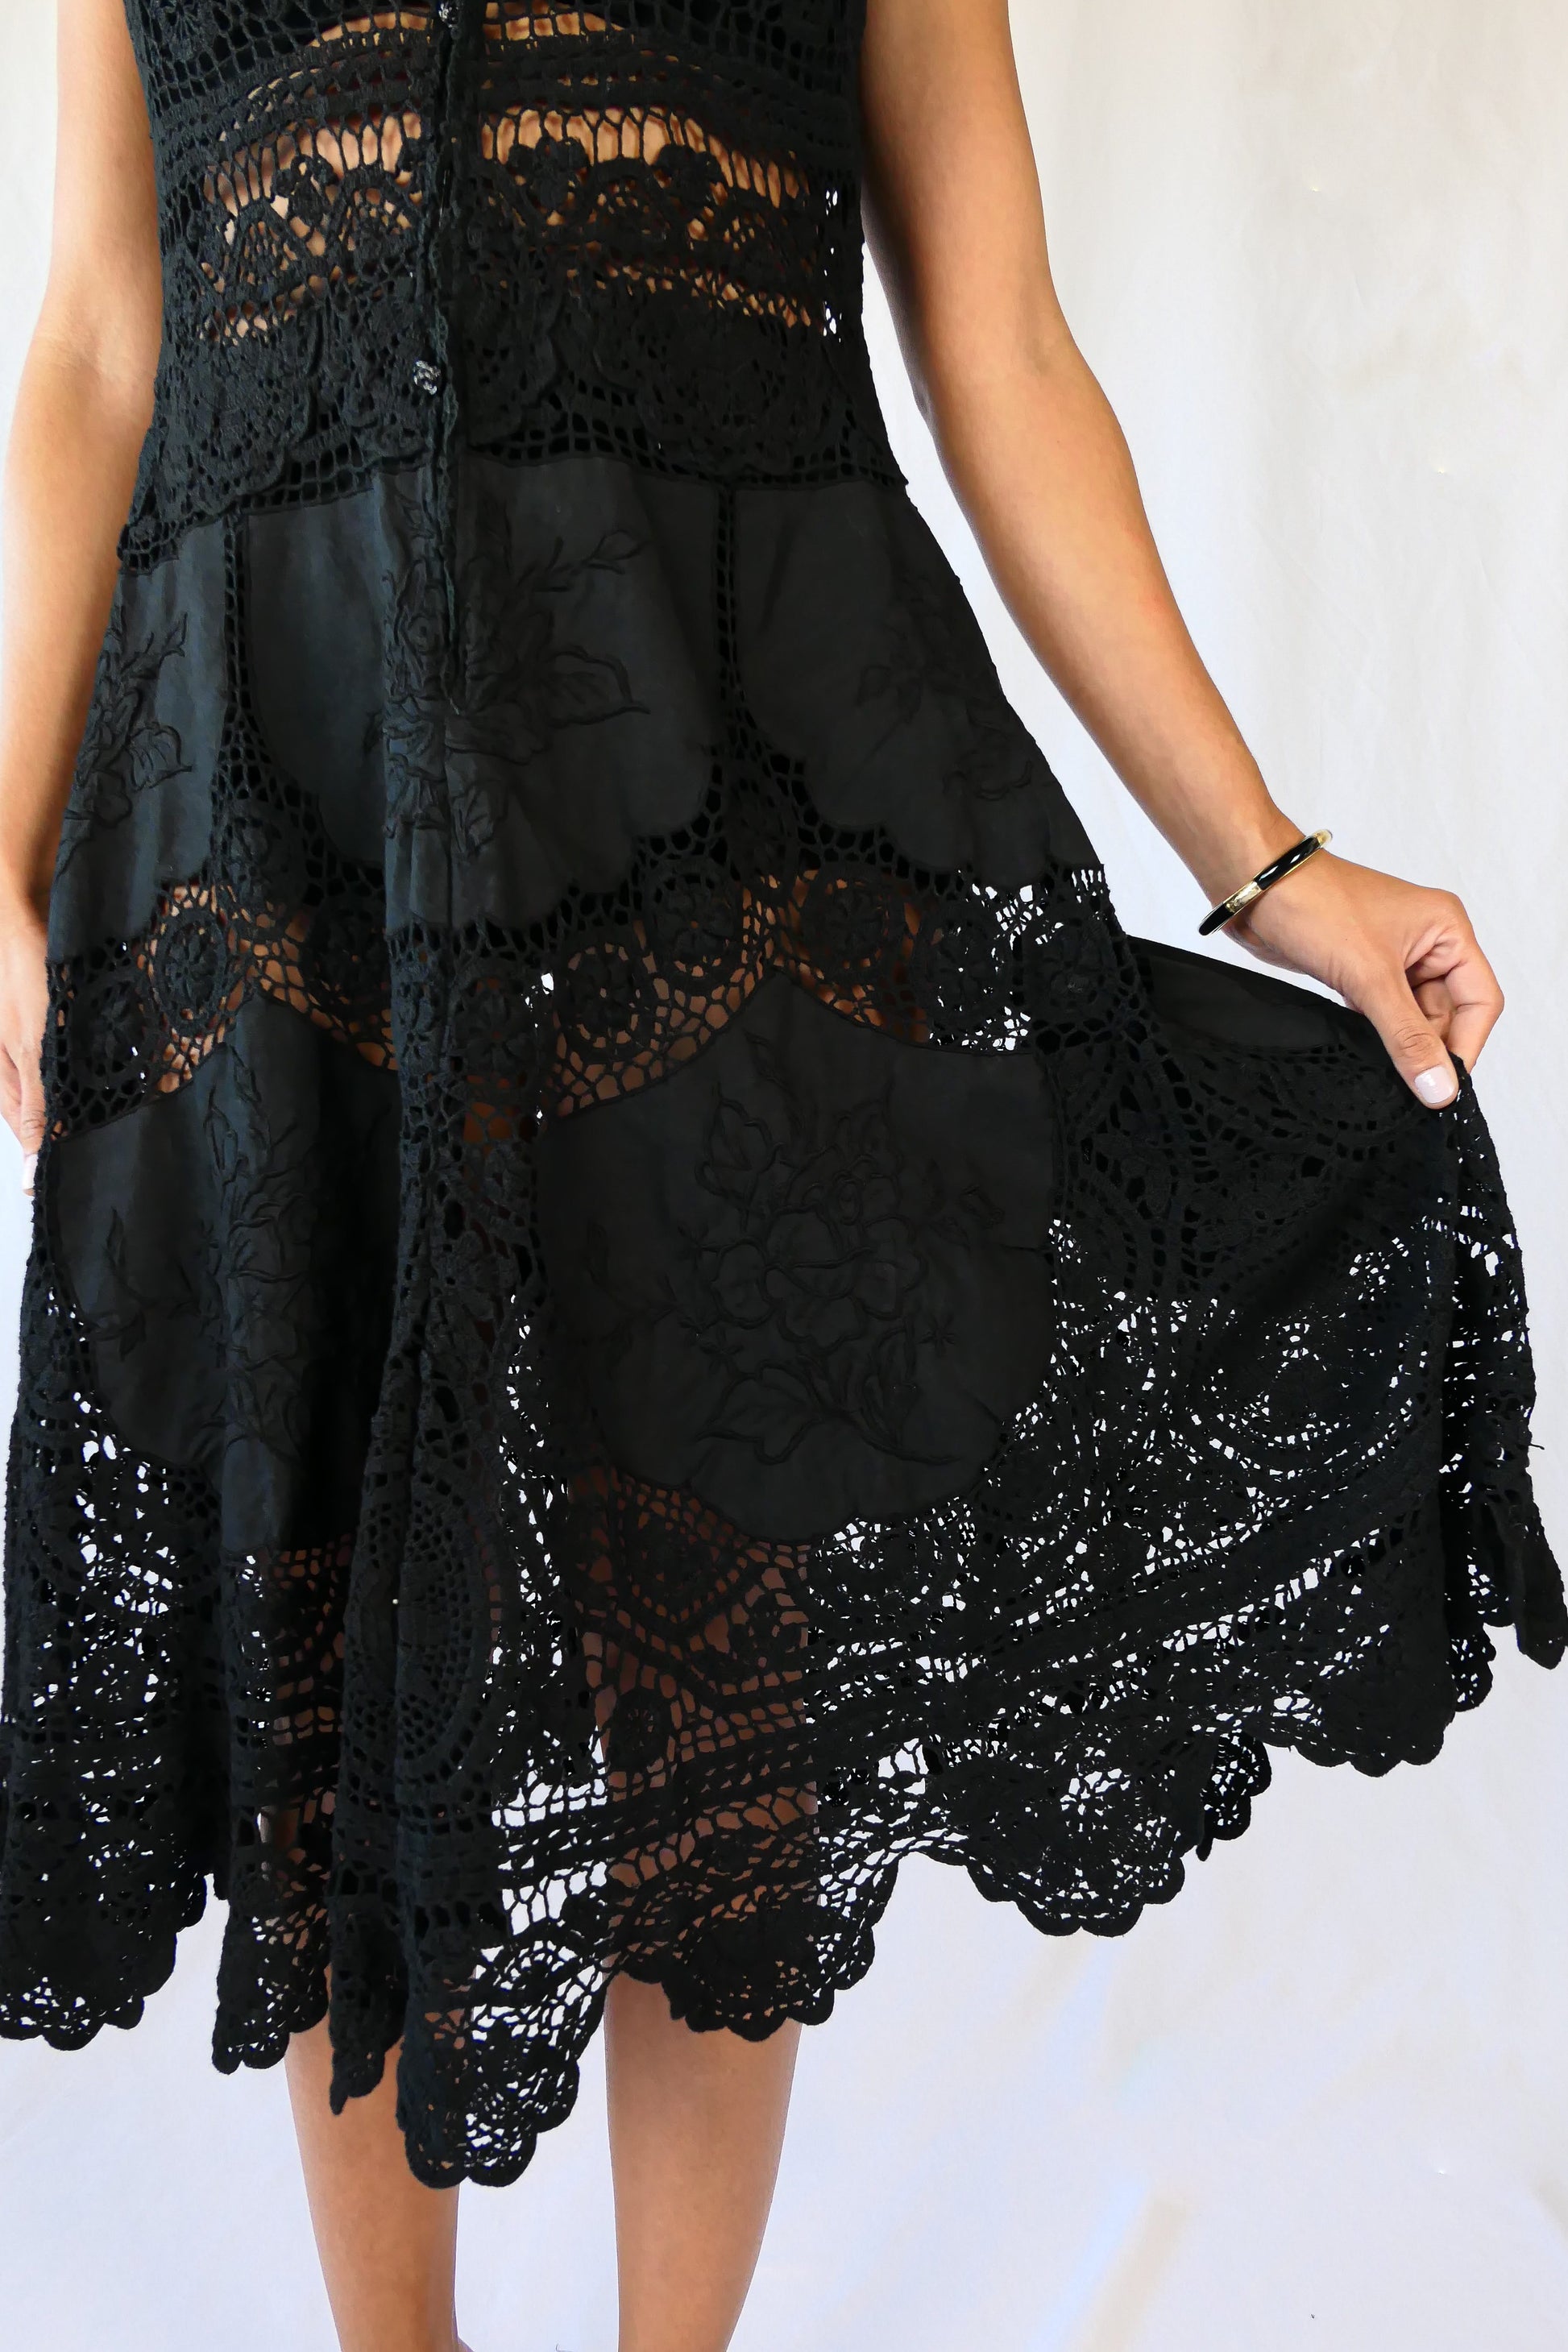 This Little Black Dress with detailed hand crochet and embroidery work lends itself a vintage flair.  The dress can be buttoned up the front or back, has a flattering fit at the waist, and flares out towards the hem.  Wear it as a cocktail dress with black heels or sandals, or as a beach coverup.  